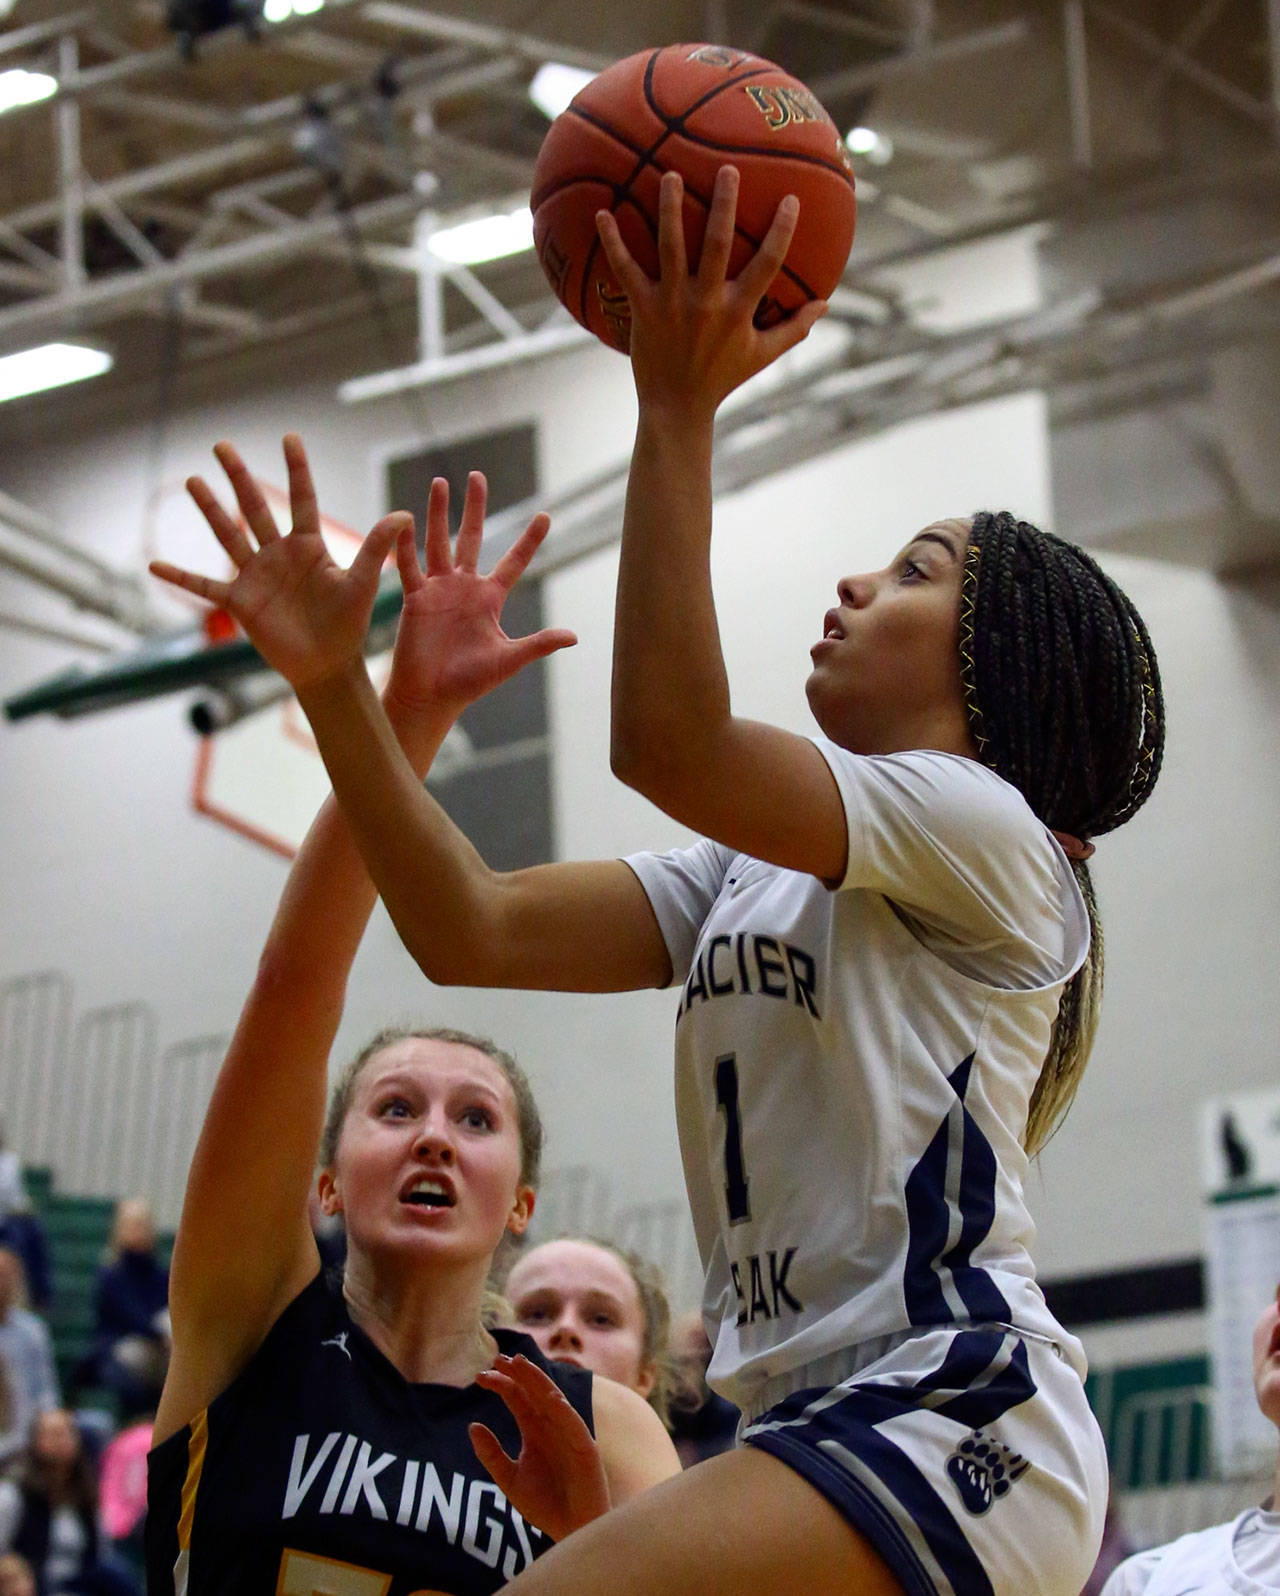 Glacier Peak’s Aaliyah Collins (right) elevates for a layup during a 4A Wes-King Bi-District Tournament game against Inglemoor on Feb. 18, 2020, at Jackson High School in Mill Creek. (Kevin Clark / The Herald)